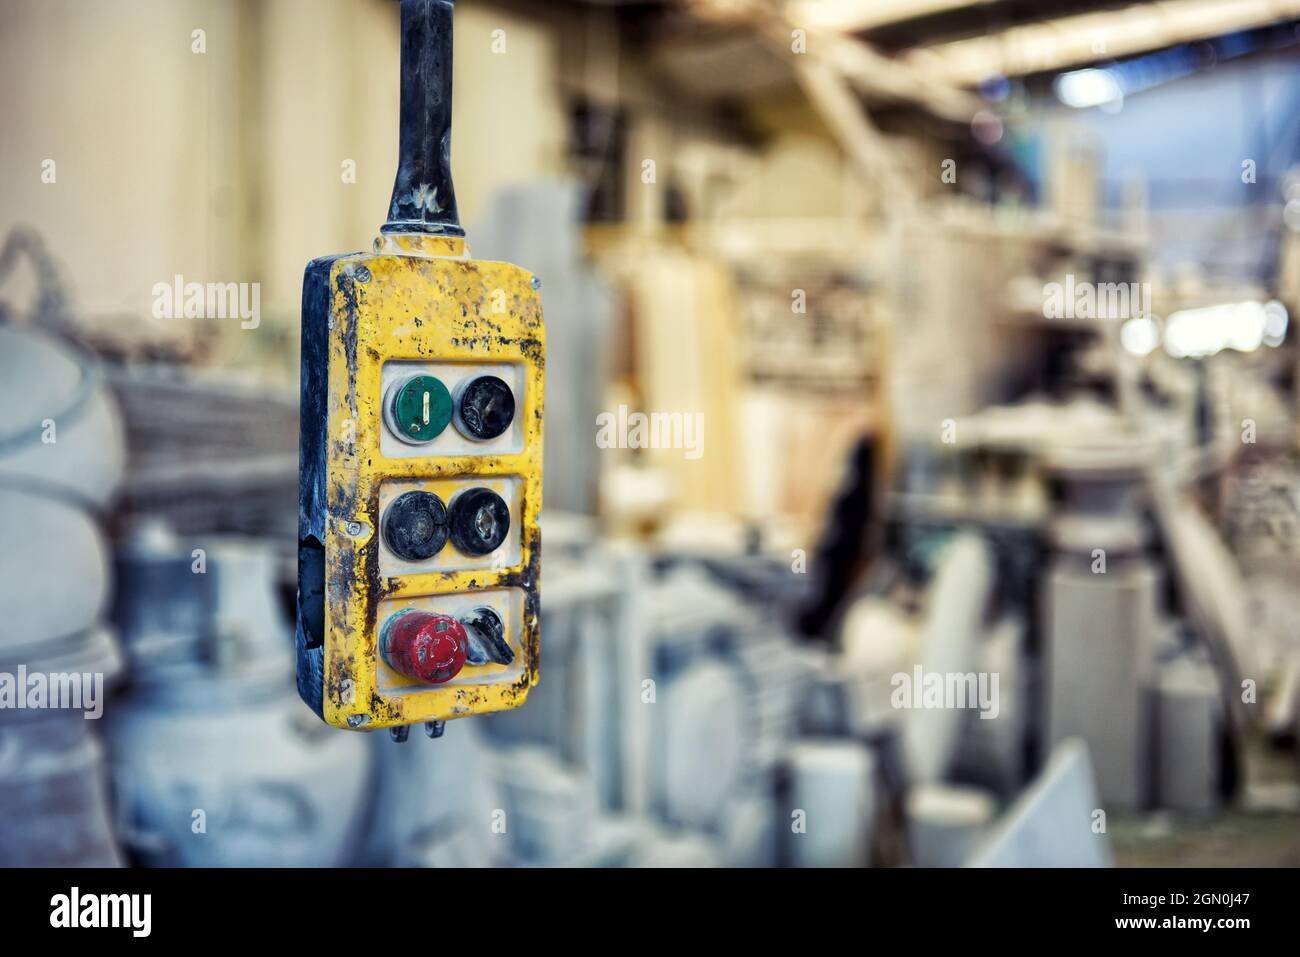 Weathered yellow controller with buttons for remote operating overhead crane hanging in industrial workplace with blurred equipment Stock Photo